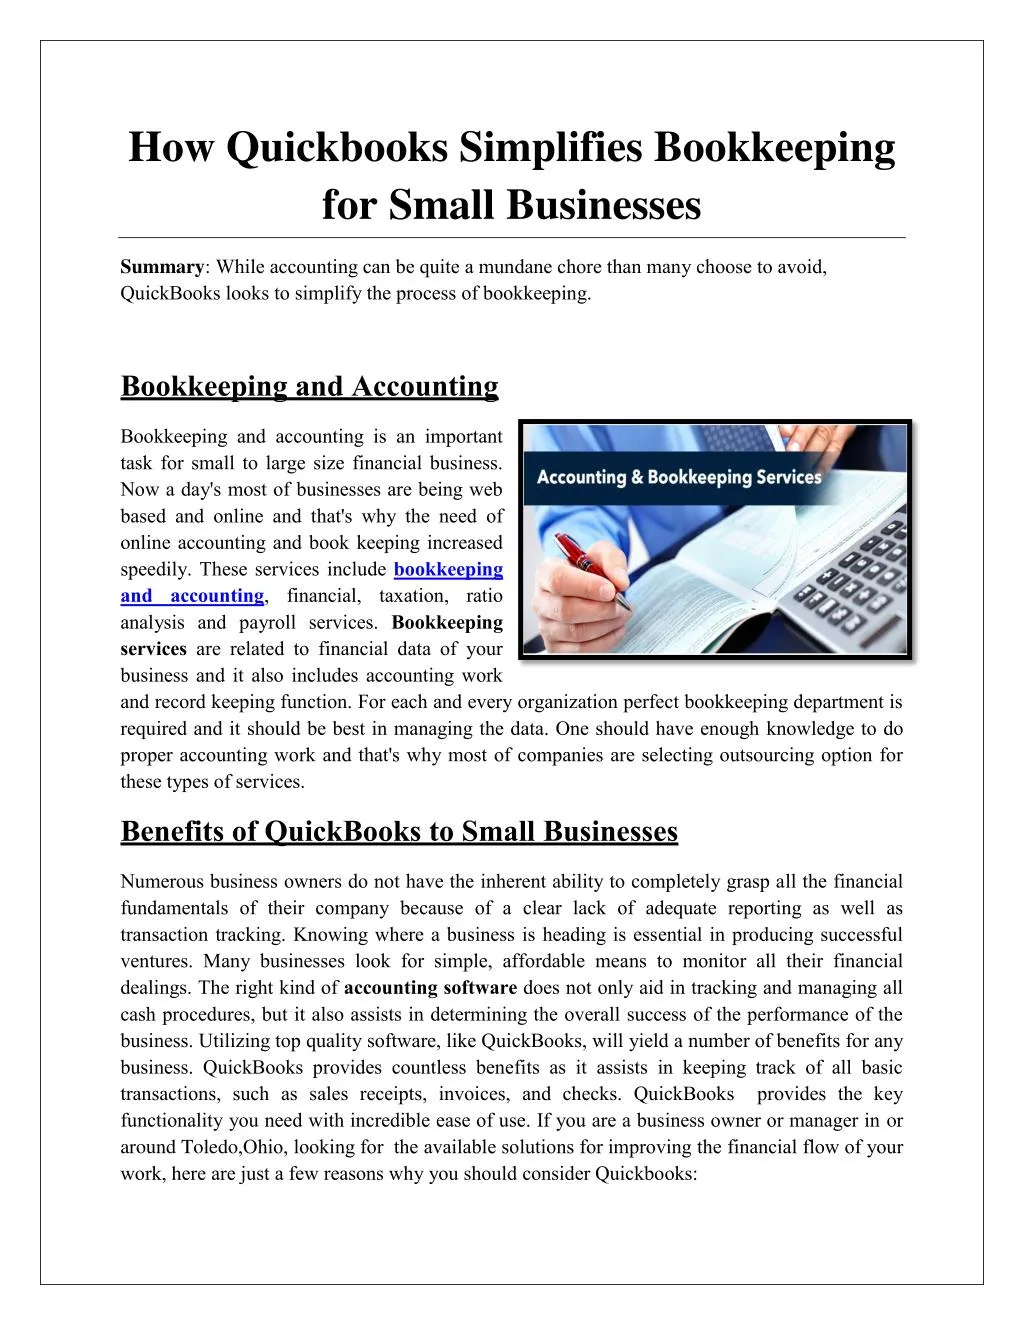 how quickbooks simplifies bookkeeping for small